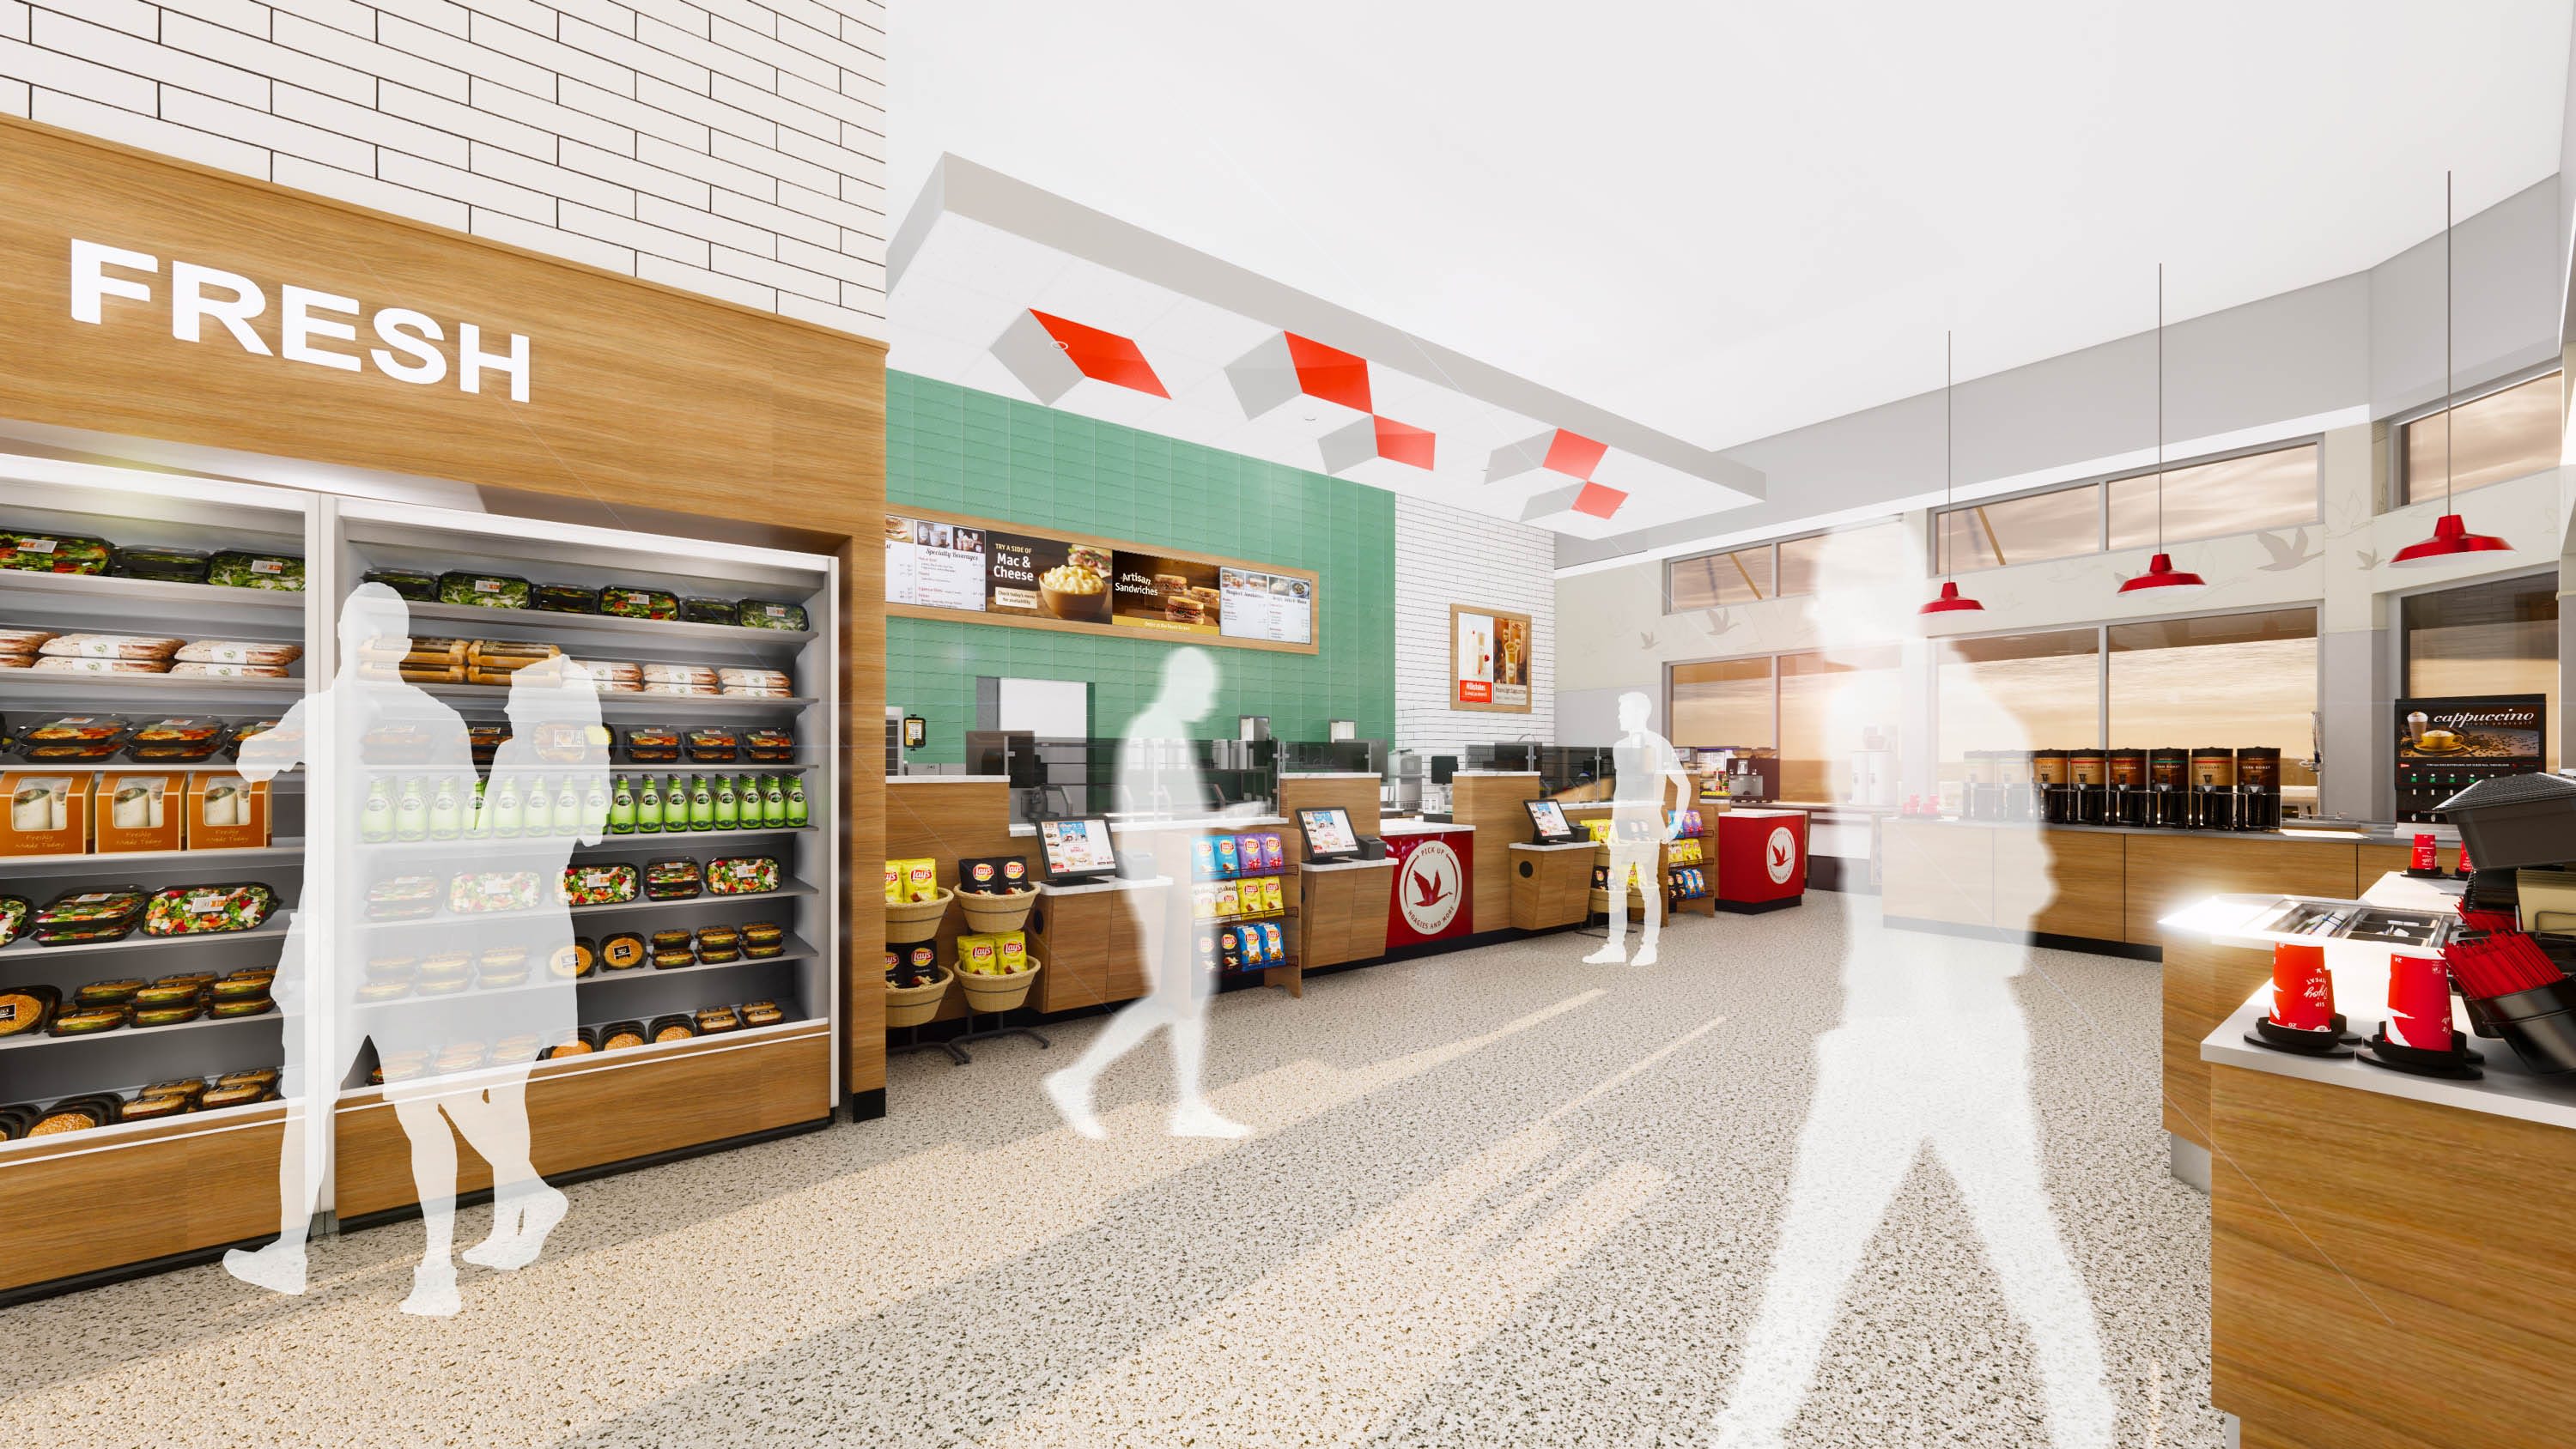 Pensacola's first Wawa broke ground. Here's what first-time visitors can expect